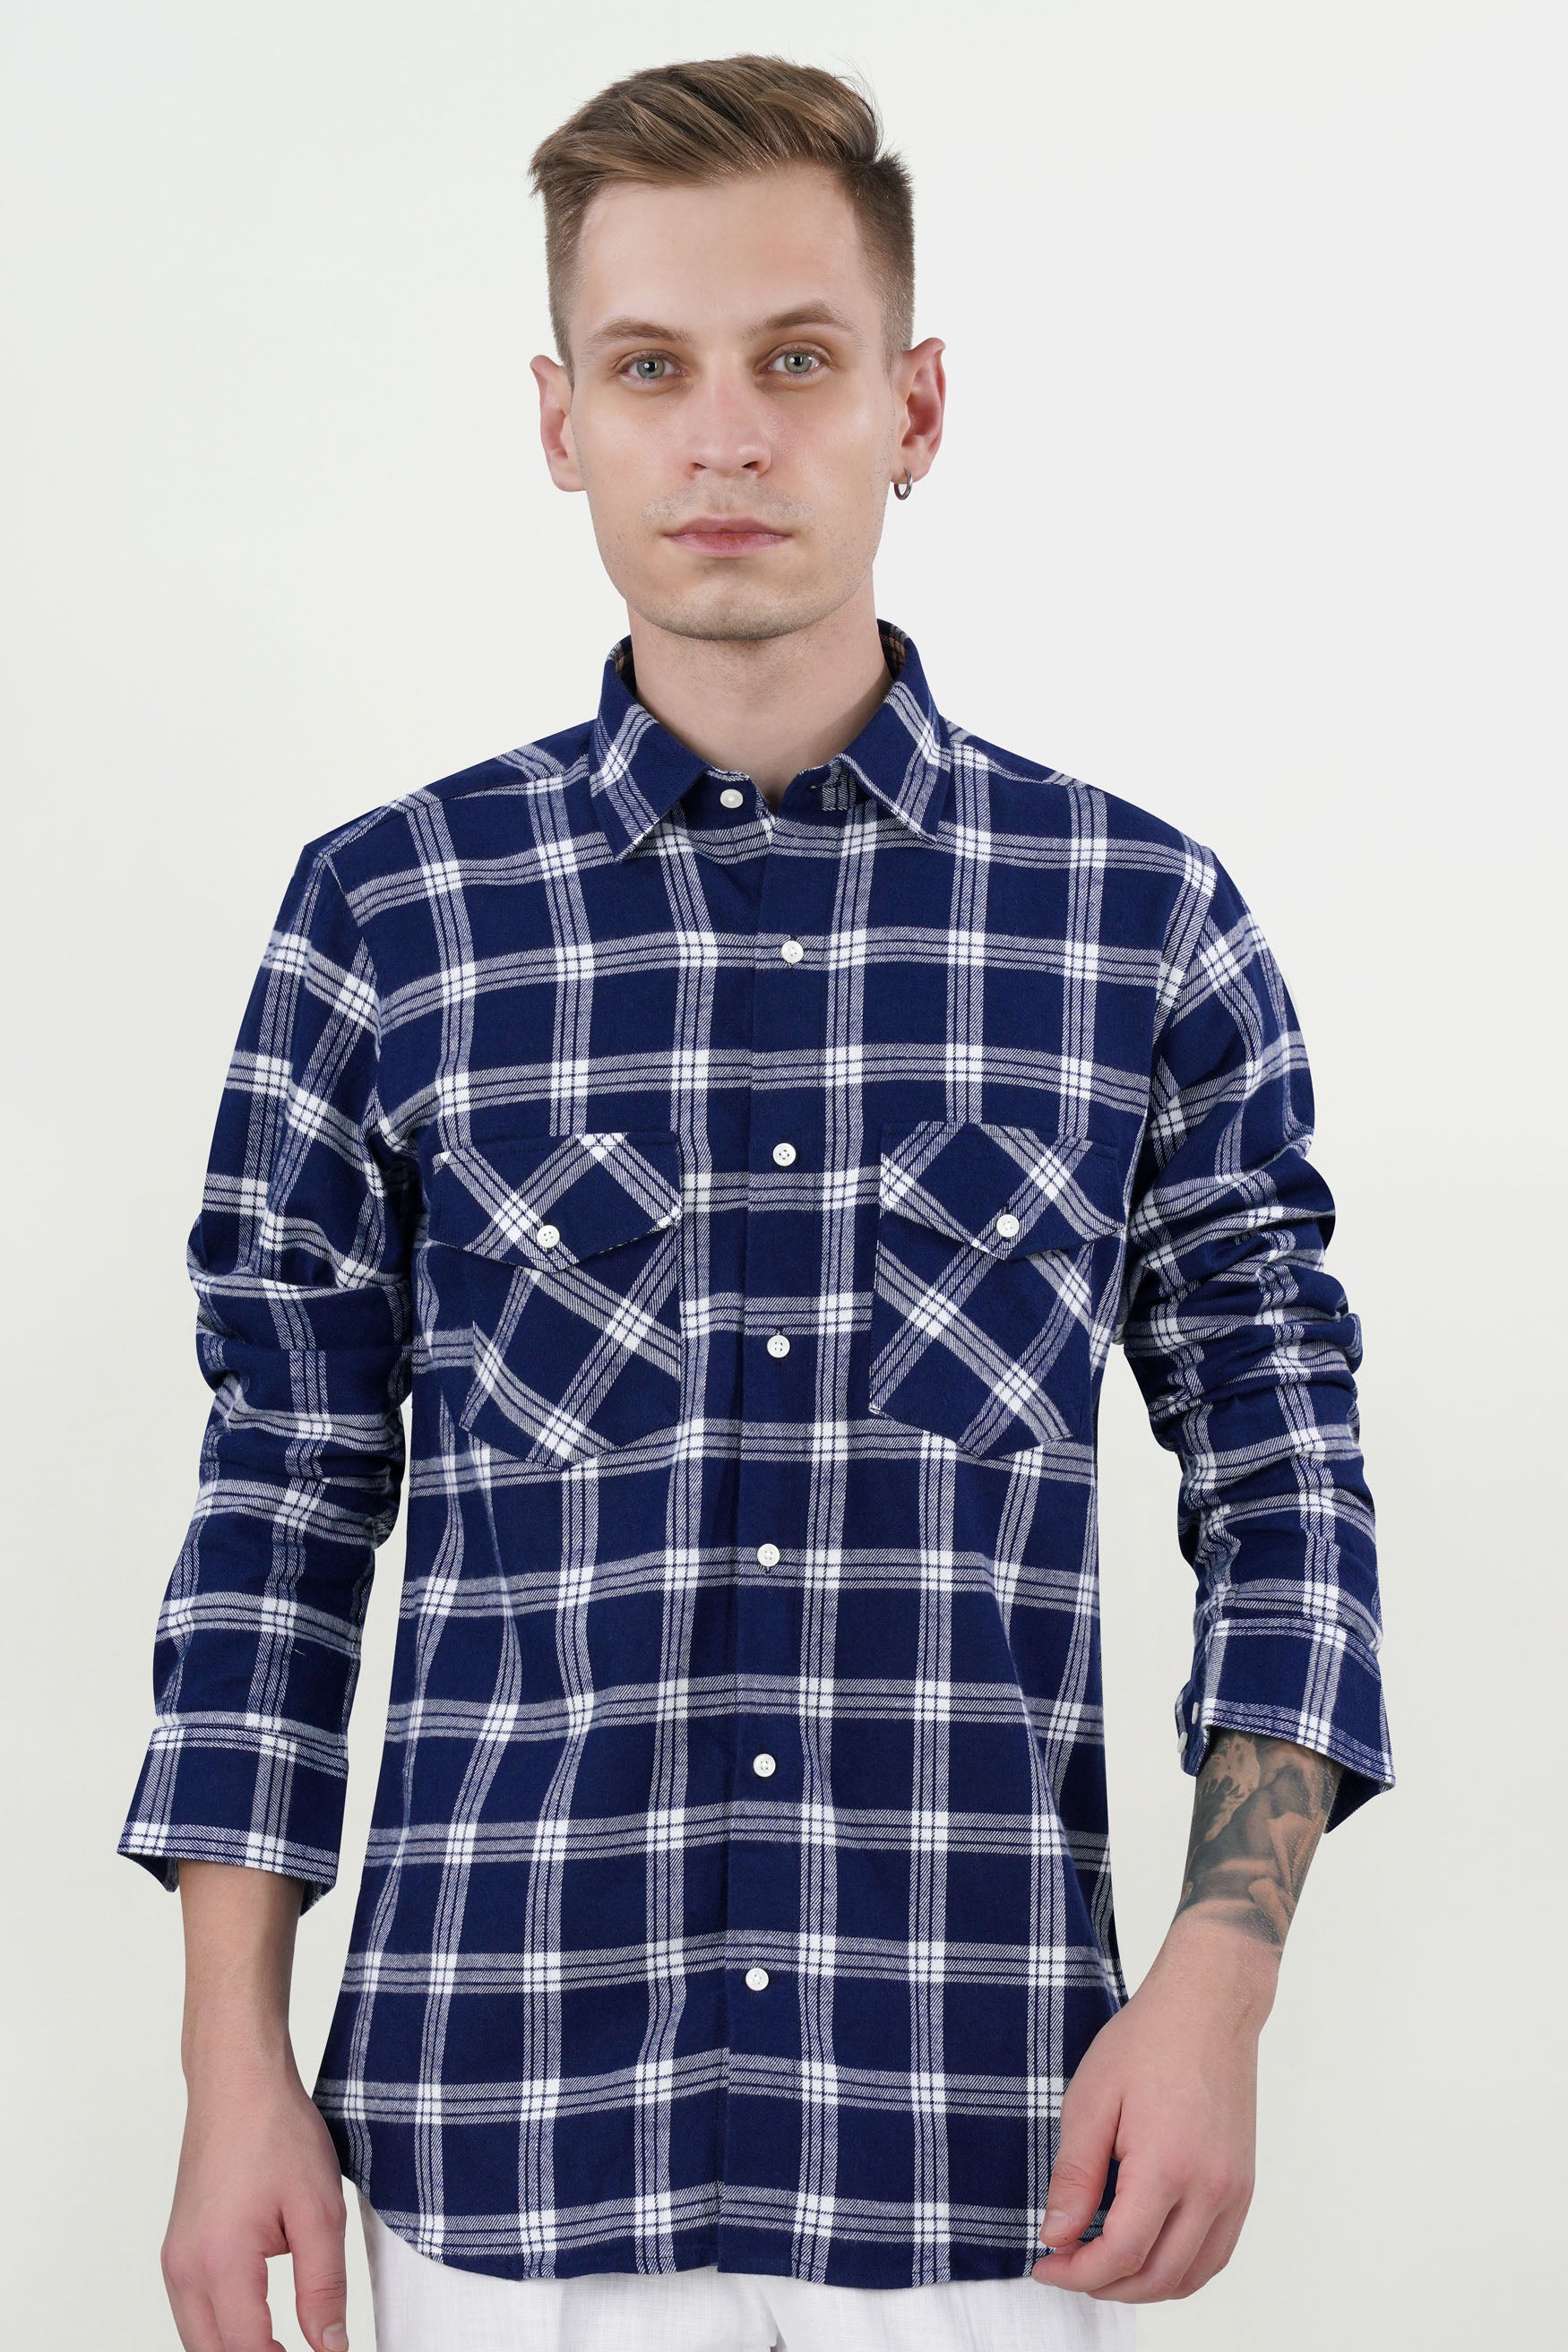 Stratos Blue and White Plaid Flannel Overshirt 11691-FP-38, 11691-FP-H-38, 11691-FP-39, 11691-FP-H-39, 11691-FP-40, 11691-FP-H-40, 11691-FP-42, 11691-FP-H-42, 11691-FP-44, 11691-FP-H-44, 11691-FP-46, 11691-FP-H-46, 11691-FP-48, 11691-FP-H-48, 11691-FP-50, 11691-FP-H-50, 11691-FP-52, 11691-FP-H-52